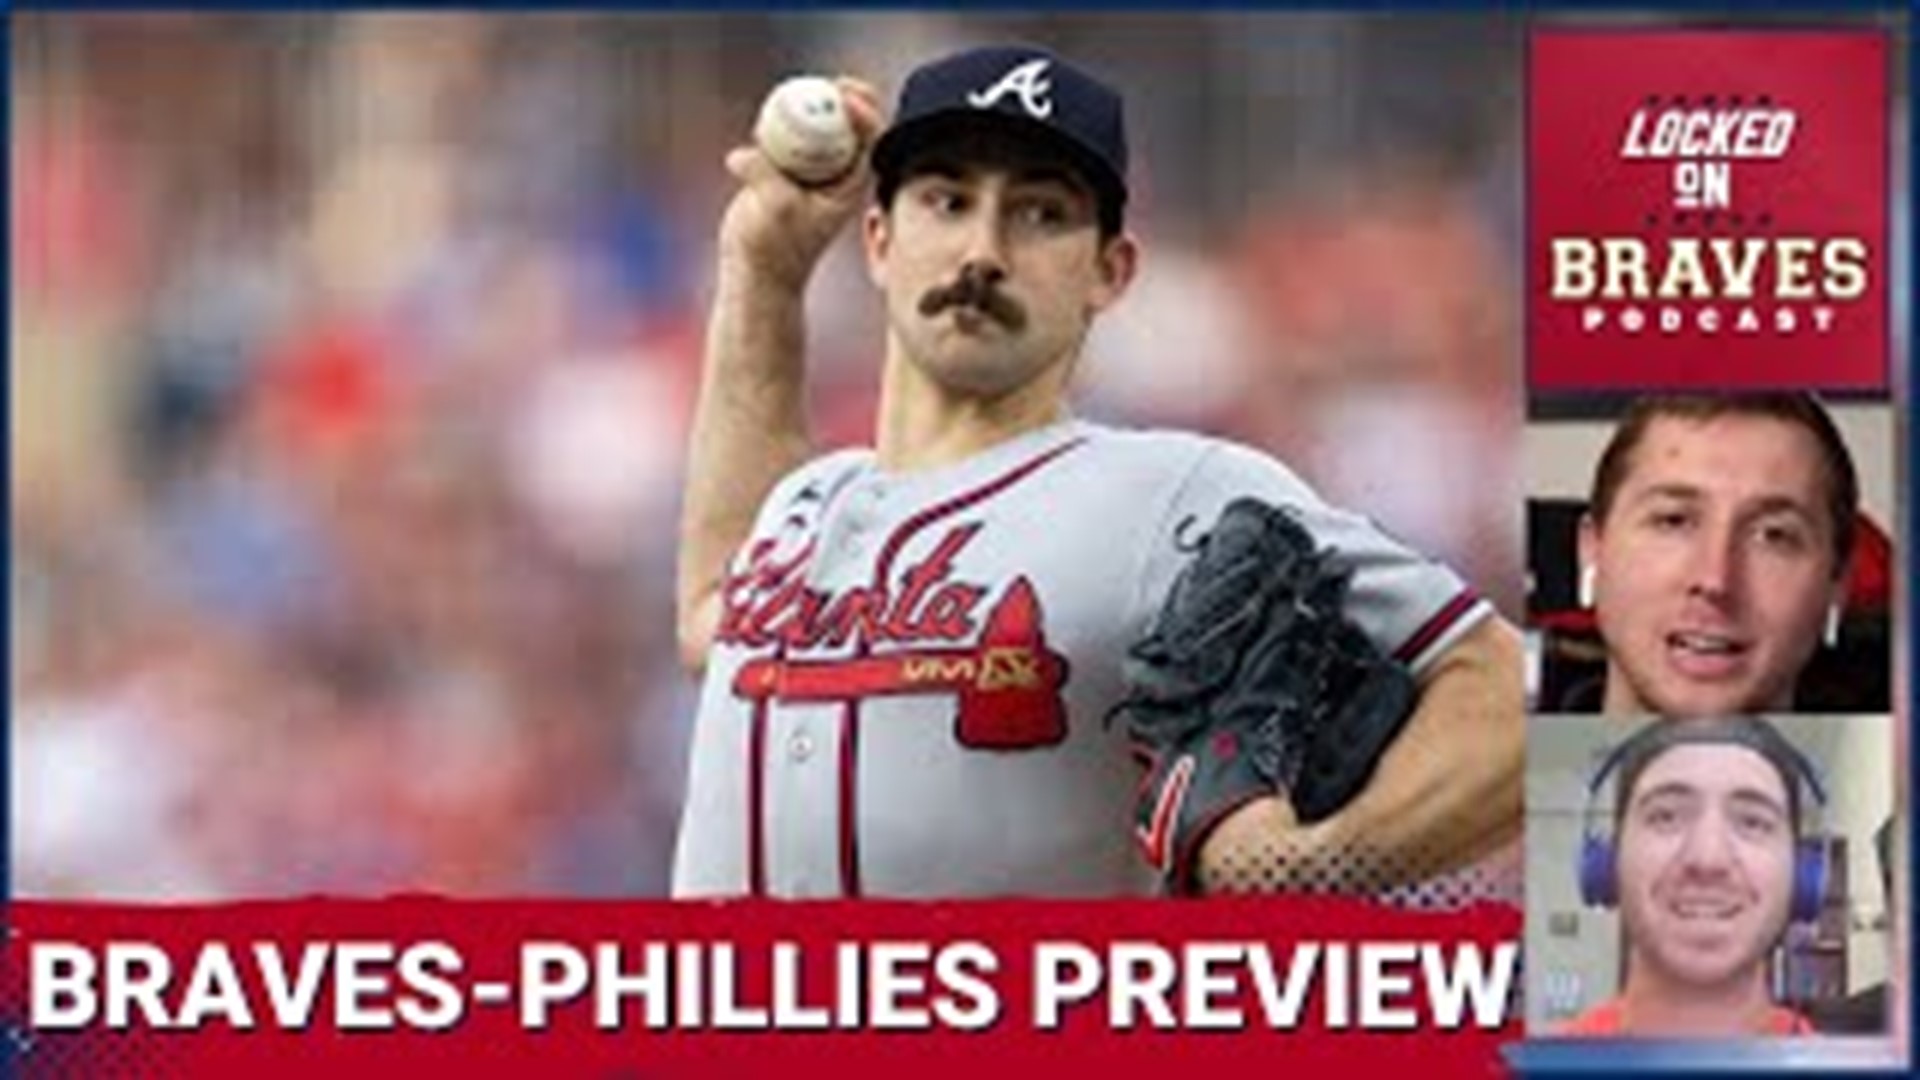 Connor Thomas of Locked on Phillies joins the show to breakdown the Opening Day series between the Atlanta Braves and Philadelphia Phillies.